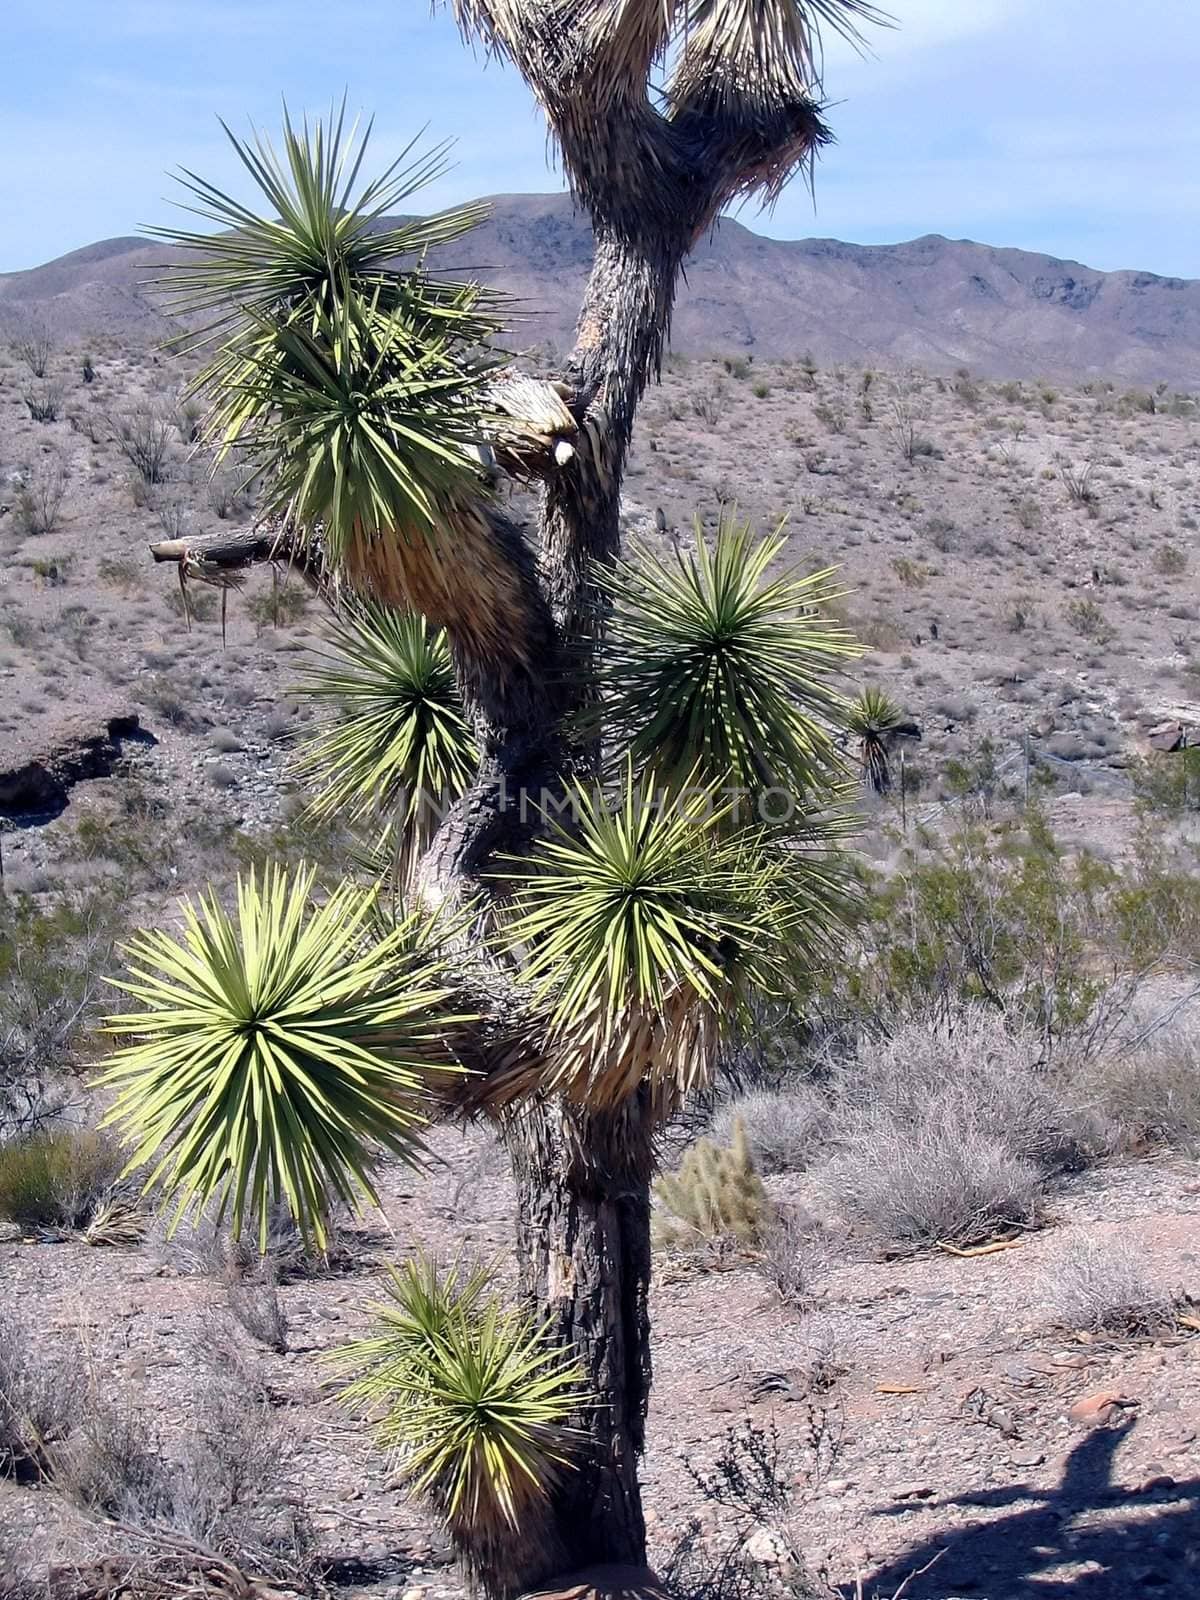 a strange and lonely cactus tree is standing in the Nevada desert